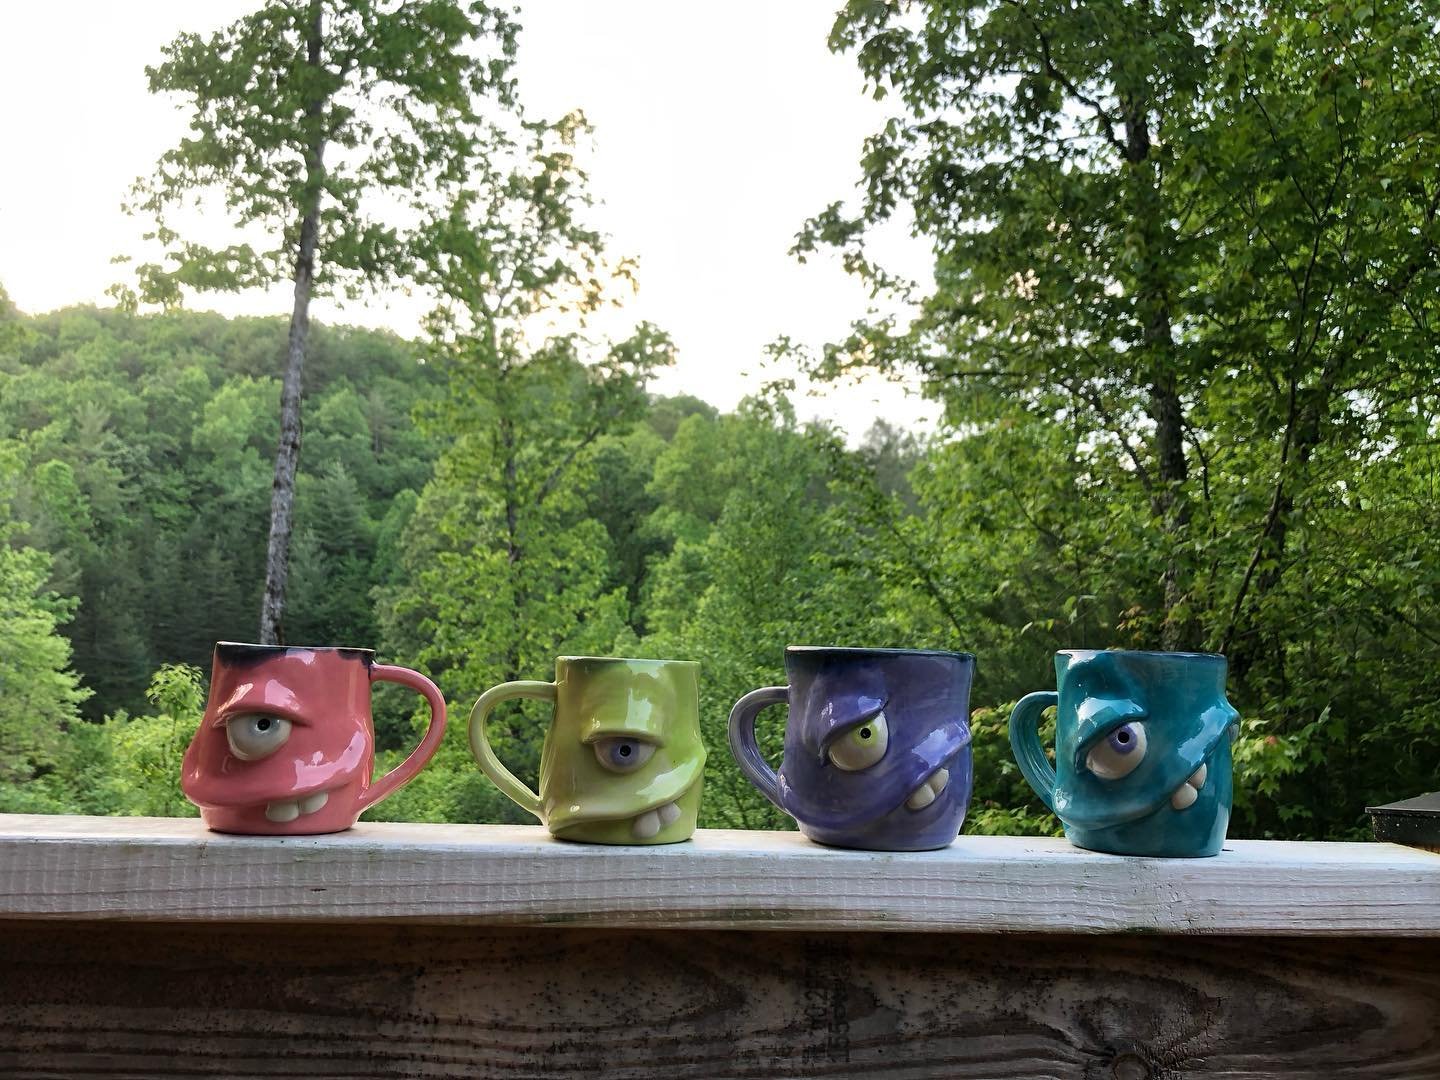 Last couple of batches before tomorrow! We are all set up and ready to go!

The Spring Southern Pottery Show is happening from 8a-2p tomorrow May 11th at the Craven Family Pottery in Gillsville, Ga! 

(I&rsquo;m definitely swinging above my weight cl